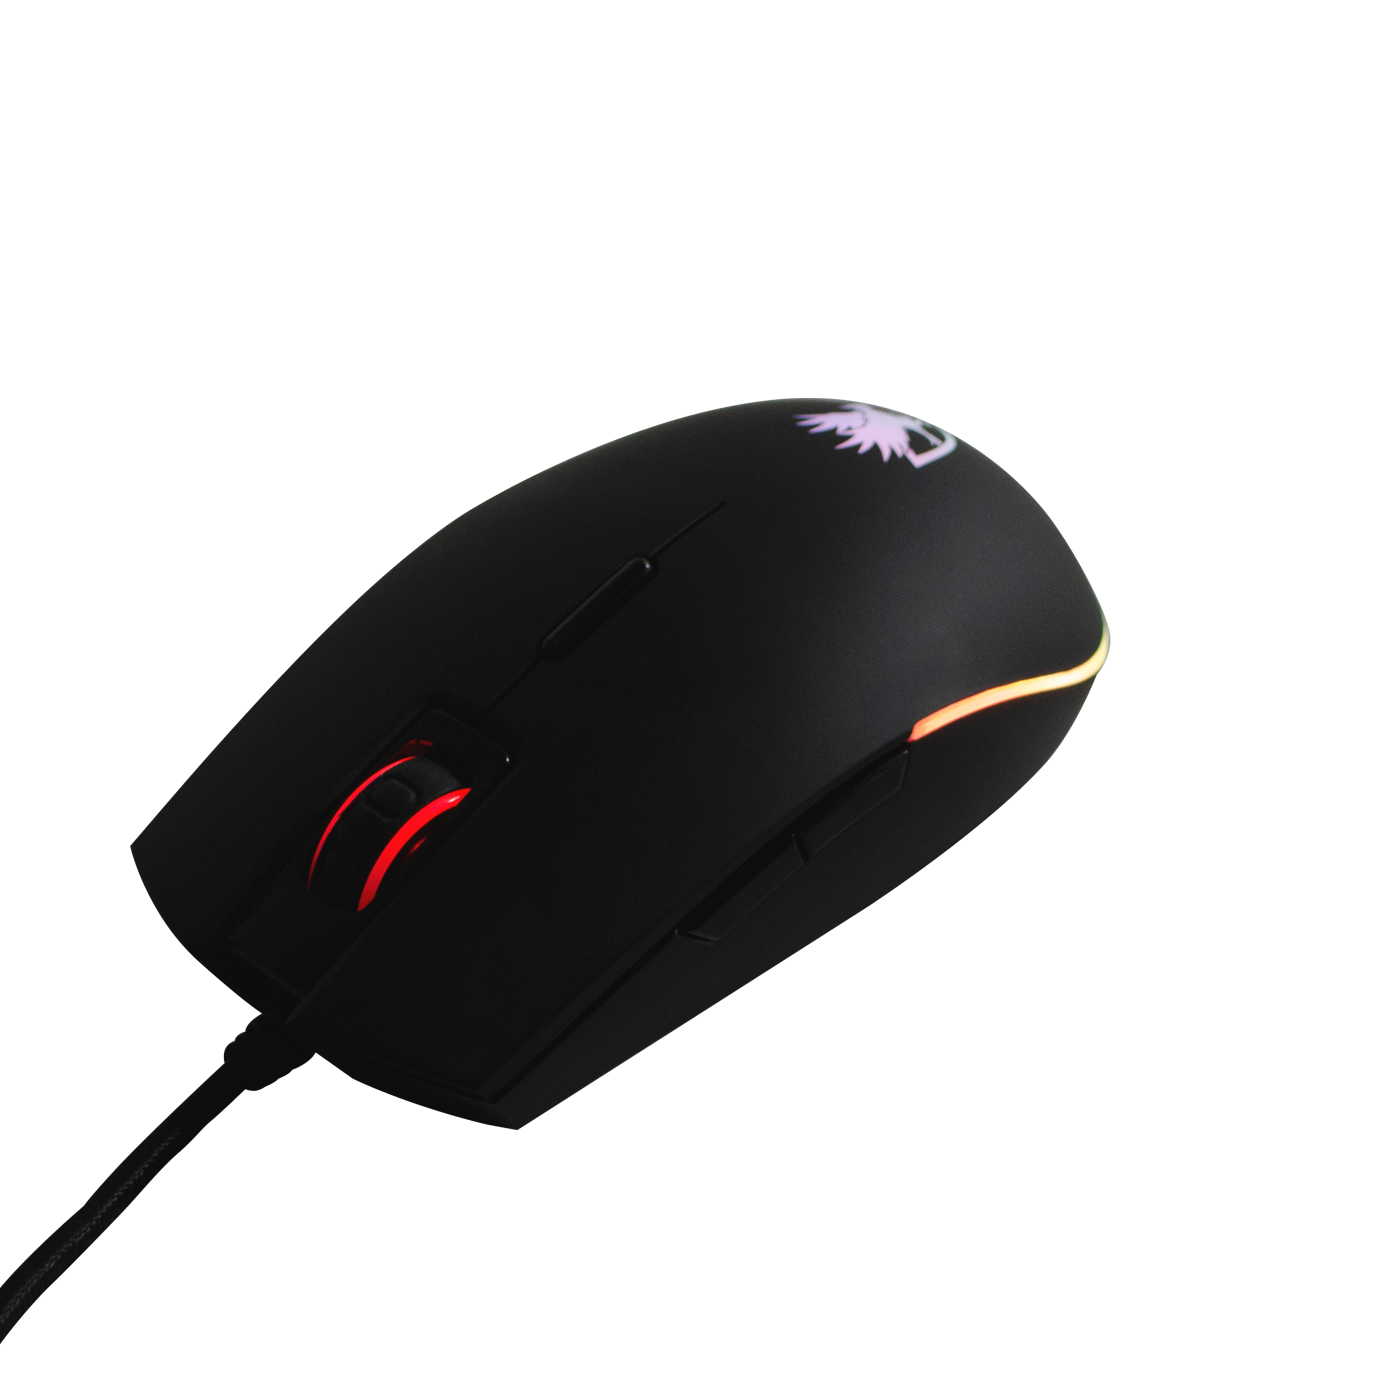 Digifast Nightfall NF24 RGB Gaming Mouse, Symmetrical Design, 50 Million Click Durability, 8 Programmable Buttons, Dynamic DPI, Customized Color, DPI